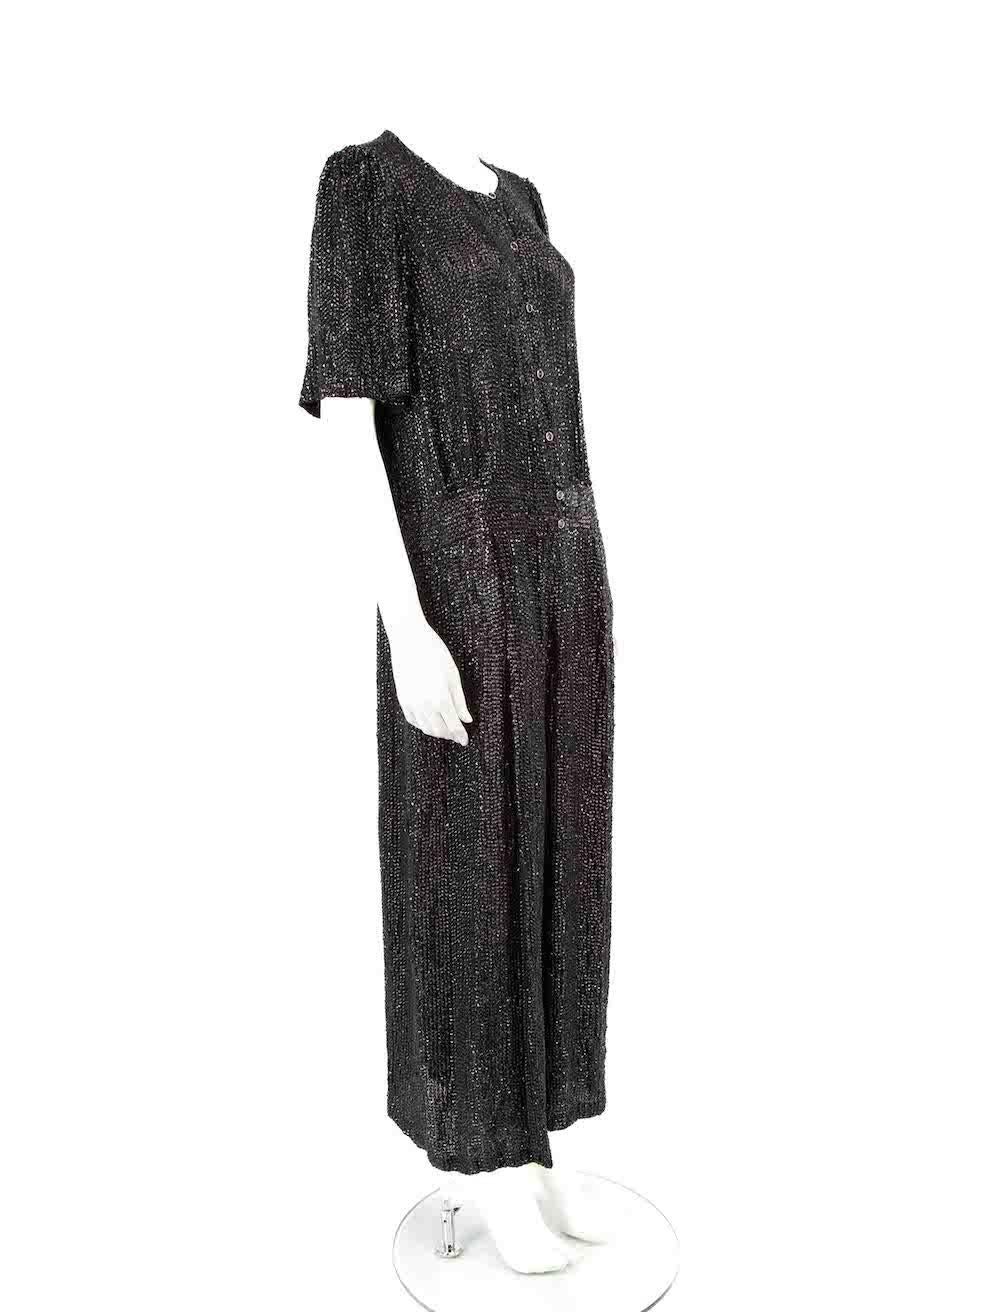 CONDITION is Good. Minor wear to jumpsuit is evident. Light wear to the front and back with missing sequins and loose threads to the embelllishment on this used Temperley designer resale item.
 
 
 
 Details
 
 
 Black
 
 Viscose
 
 Jumpsuit
 
